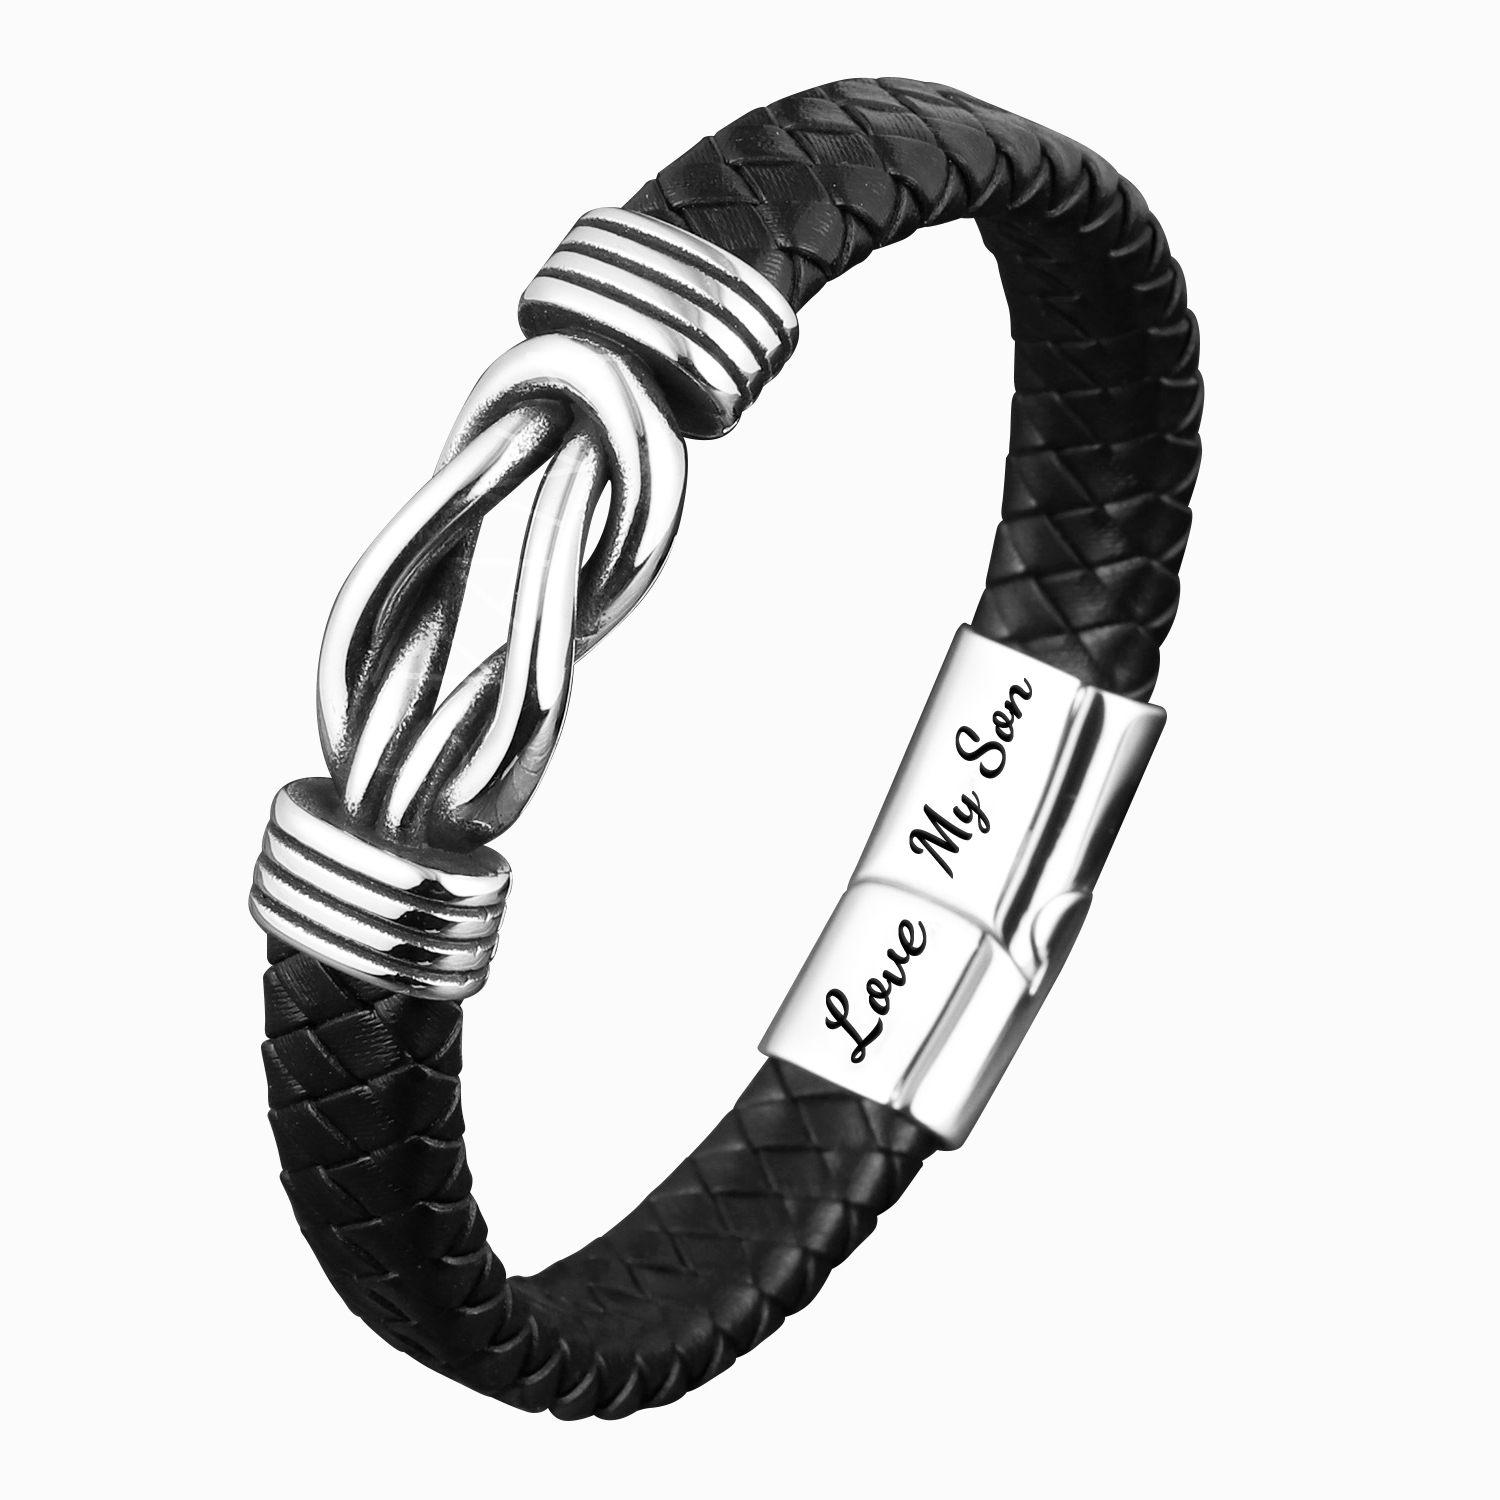 Mother To Son - Forever Linked Together - Braided Leather Bracelet